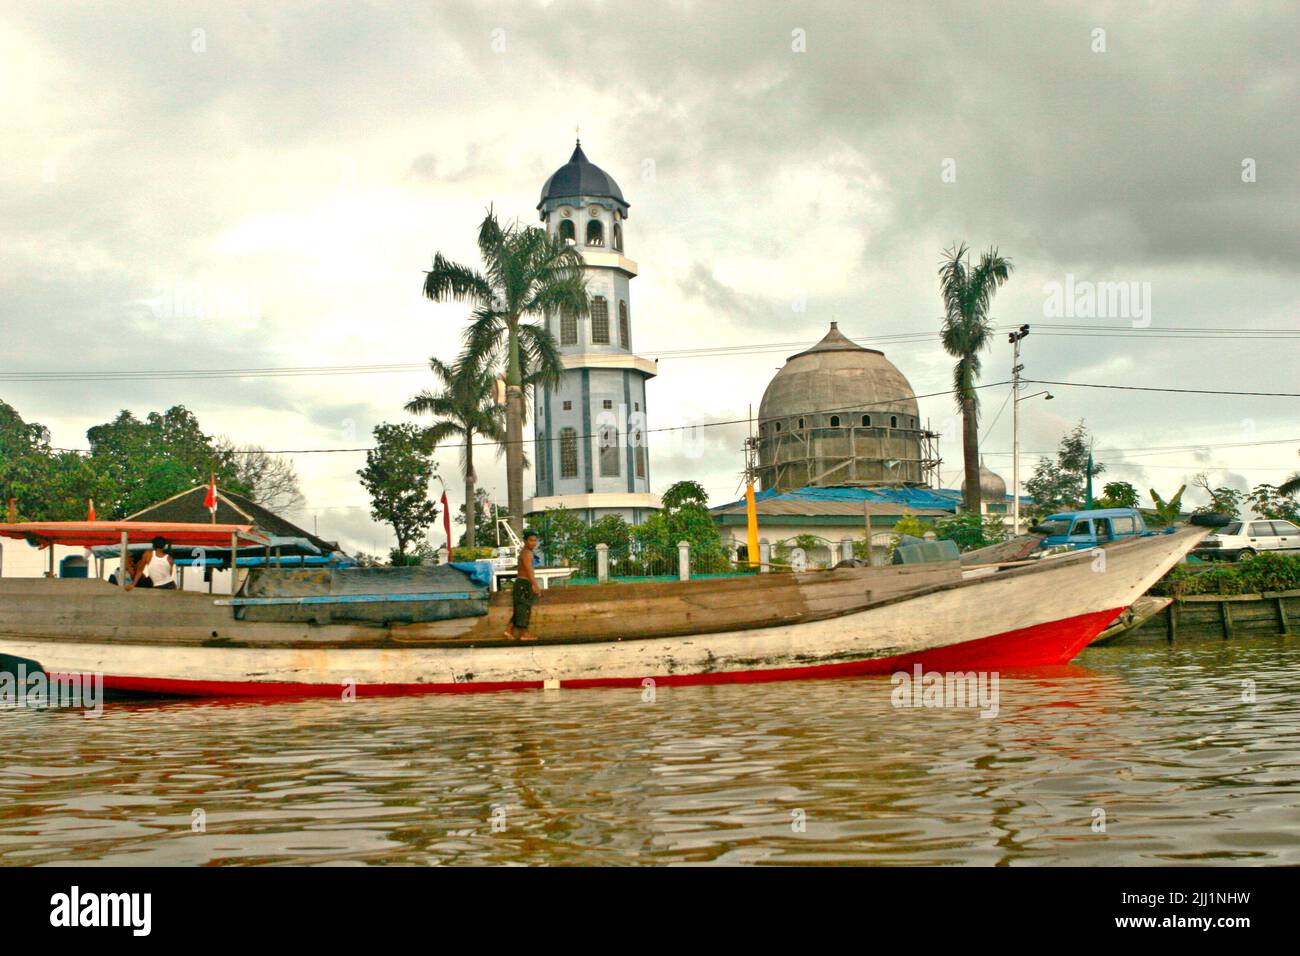 A mosque is photographed in a foreground of a boat, seen from Segah river in Tanjung Redeb, Berau, East Kalimantan, Indonesia. Stock Photo